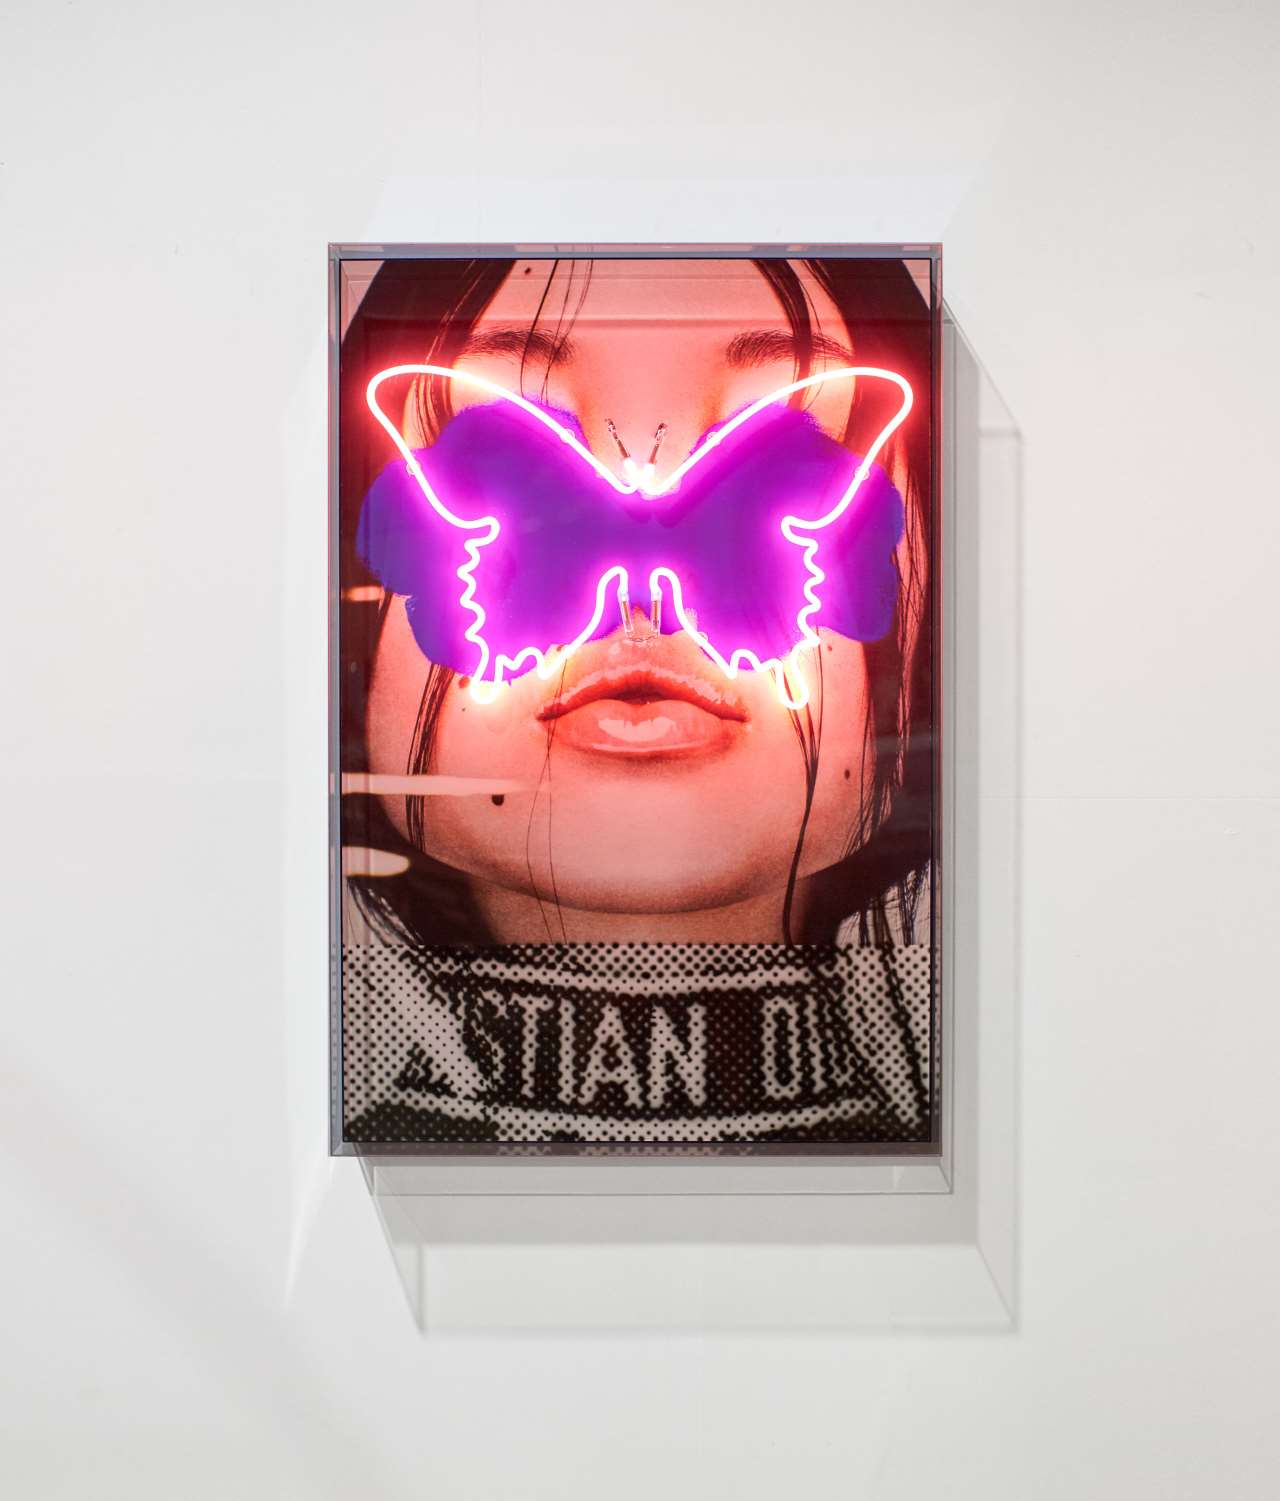 Dina Broadhurst x Tom Adair, Flutterby, Exclusive limited edition of 10 pieces, 80 x 120 x 16 cm. Giclee print on smooth cotton rag paper, mounted on dibond, airbrush acrylic, hand bent glass neon in pink, clear acrylic box frame with blue mirror acrylic edging, requires 240v. © Tom Adair.